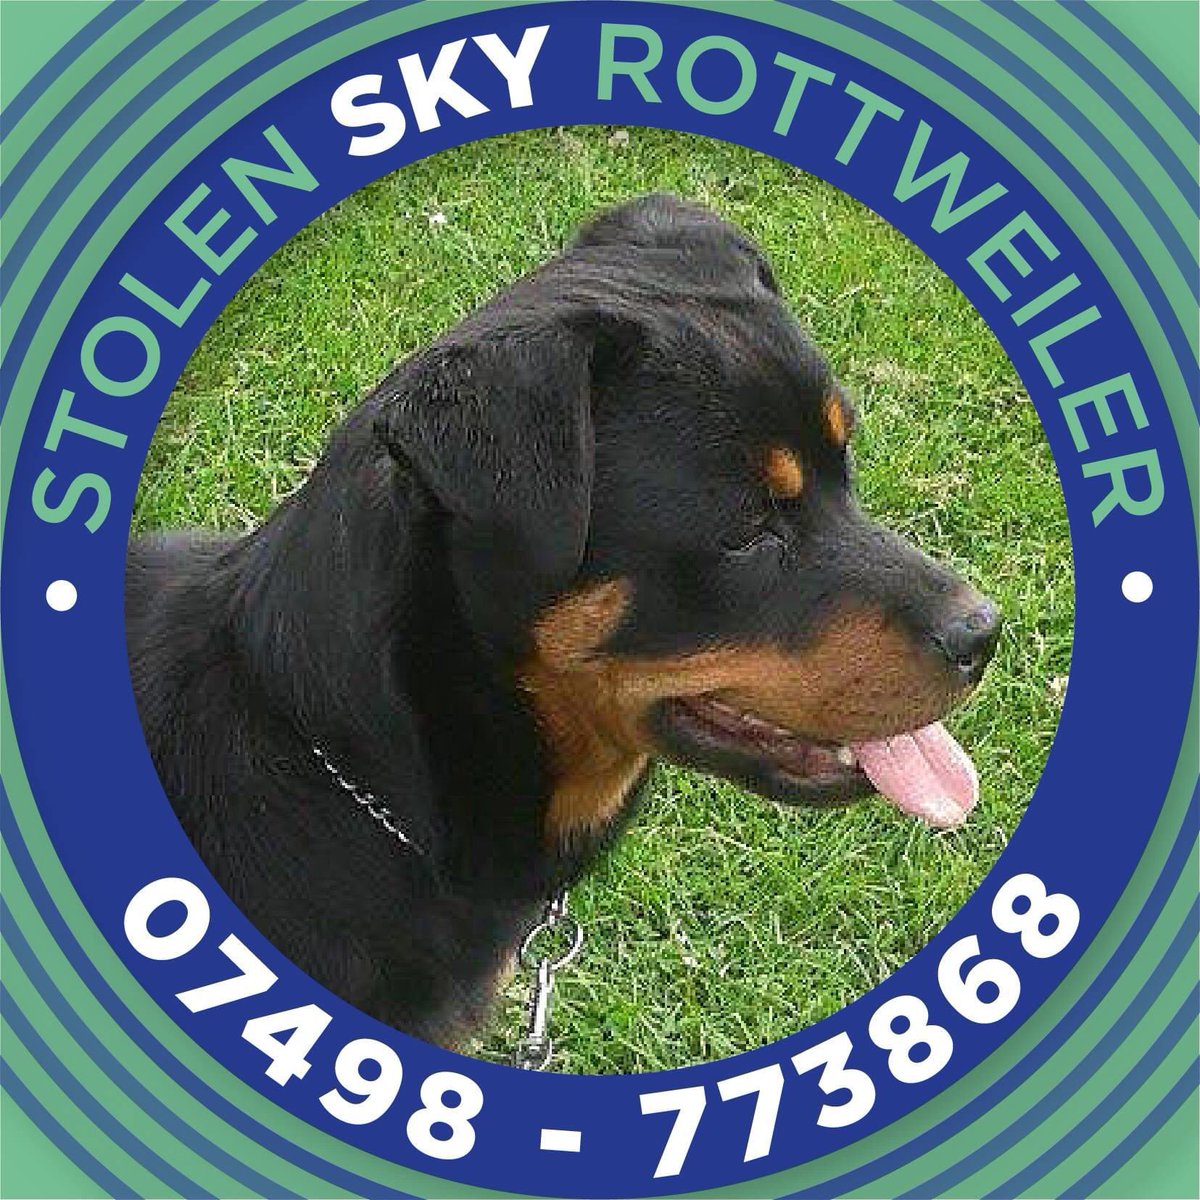 #getSkyhome SKYS BEEN WAITING since 2/12/15 to be scanned
YOU can help make this happen ⬇️
Takes a few minutes...you need to check emails to confirm 
🌷SKY SAYS TY X

Petition: Fern’s Law: Compulsory to scan & check microchips to reunite stolen dogs, cats. petition.parliament.uk/petitions/3000…